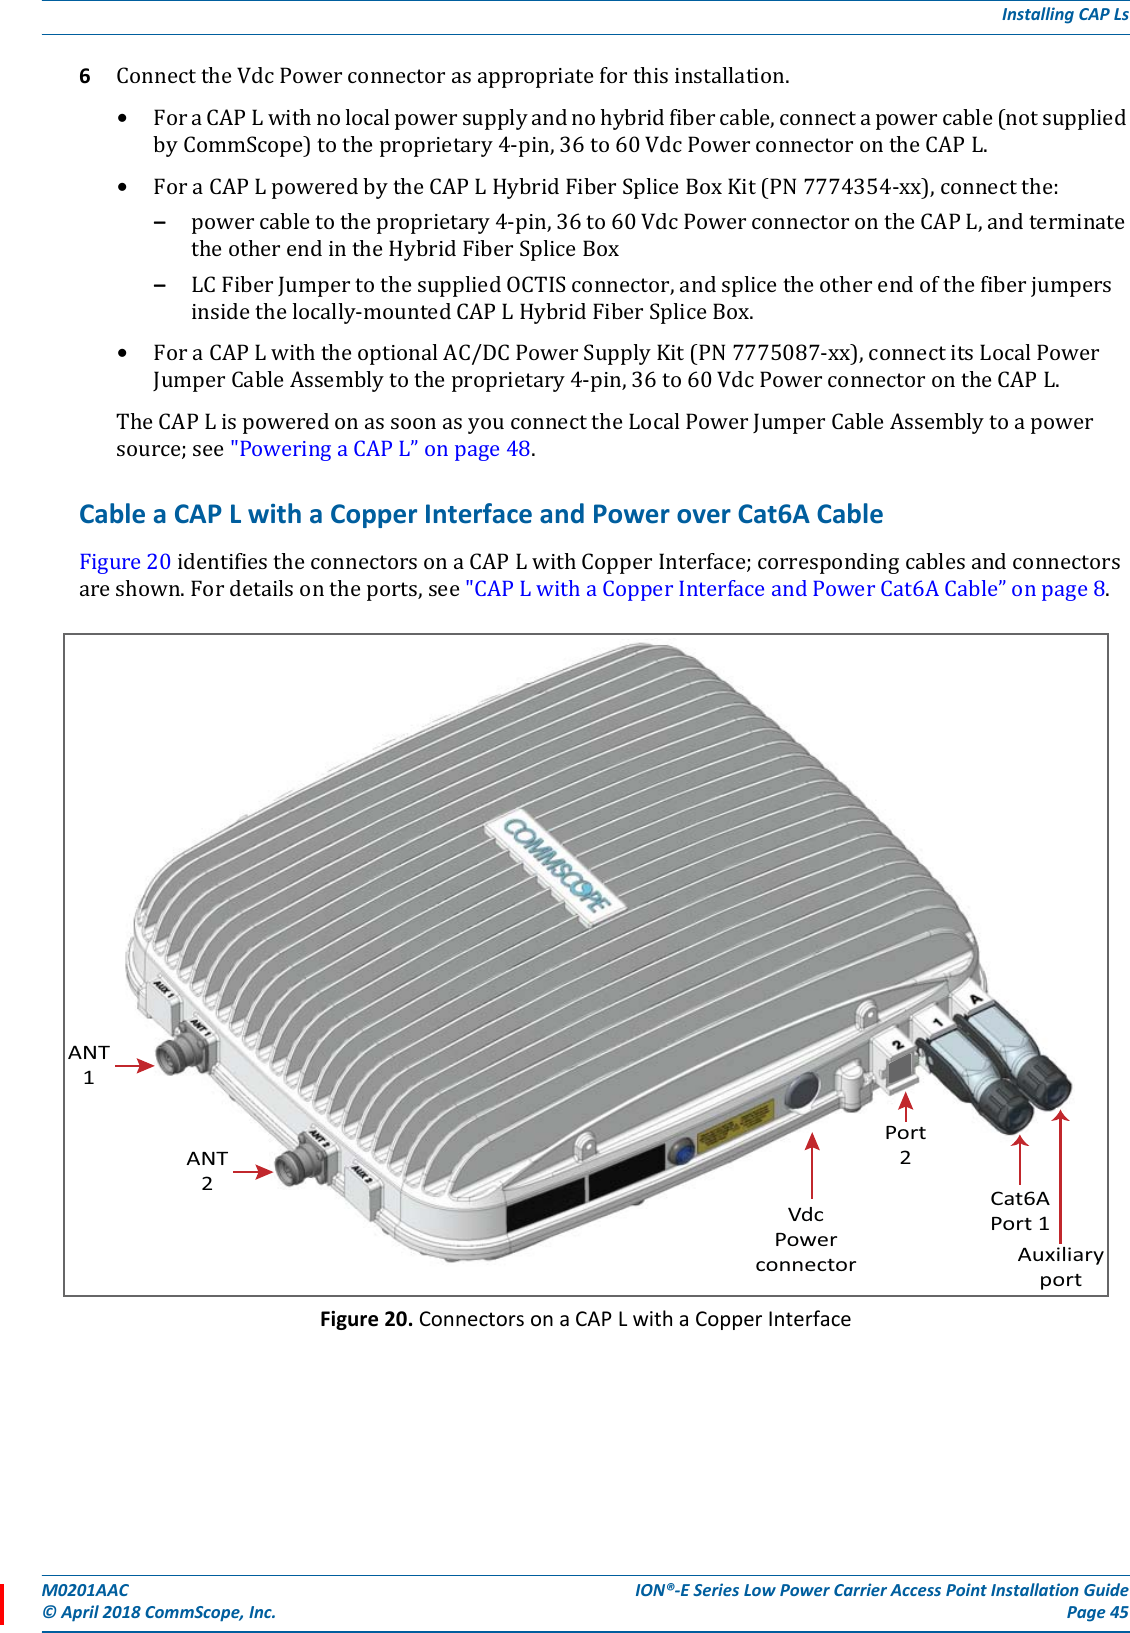 M0201AAC ION®-E Series Low Power Carrier Access Point Installation Guide© April 2018 CommScope, Inc. Page 45Installing CAP Ls6ConnecttheVdcPowerconnectorasappropriateforthisinstallation.•ForaCAPLwithnolocalpowersupplyandnohybridfibercable,connectapowercable(notsuppliedbyCommScope)totheproprietary4-pin,36to60VdcPowerconnectorontheCAPL.•ForaCAPLpoweredbytheCAPLHybridFiberSpliceBoxKit(PN7774354-xx),connectthe:–powercabletotheproprietary4-pin,36to60VdcPowerconnectorontheCAPL,andterminatetheotherendintheHybridFiberSpliceBox–LCFiberJumpertothesuppliedOCTISconnector,andsplicetheotherendofthefiberjumpersinsidethelocally-mountedCAPLHybridFiberSpliceBox.•ForaCAPLwiththeoptionalAC/DCPowerSupplyKit(PN7775087-xx),connectitsLocalPowerJumperCableAssemblytotheproprietary4-pin,36to60VdcPowerconnectorontheCAPL.TheCAPLispoweredonassoonasyouconnecttheLocalPowerJumperCableAssemblytoapowersource;see&quot;PoweringaCAPL”onpage48.Cable a CAP L with a Copper Interface and Power over Cat6A CableFigure20identifiestheconnectorsonaCAPLwithCopperInterface;correspondingcablesandconnectorsareshown.Fordetailsontheports,see&quot;CAPLwithaCopperInterfaceandPowerCat6ACable”onpage8.Figure 20. Connectors on a CAP L with a Copper InterfaceANT1ANT2VdcPowerconnector AuxiliaryportCat6APort 1Port2